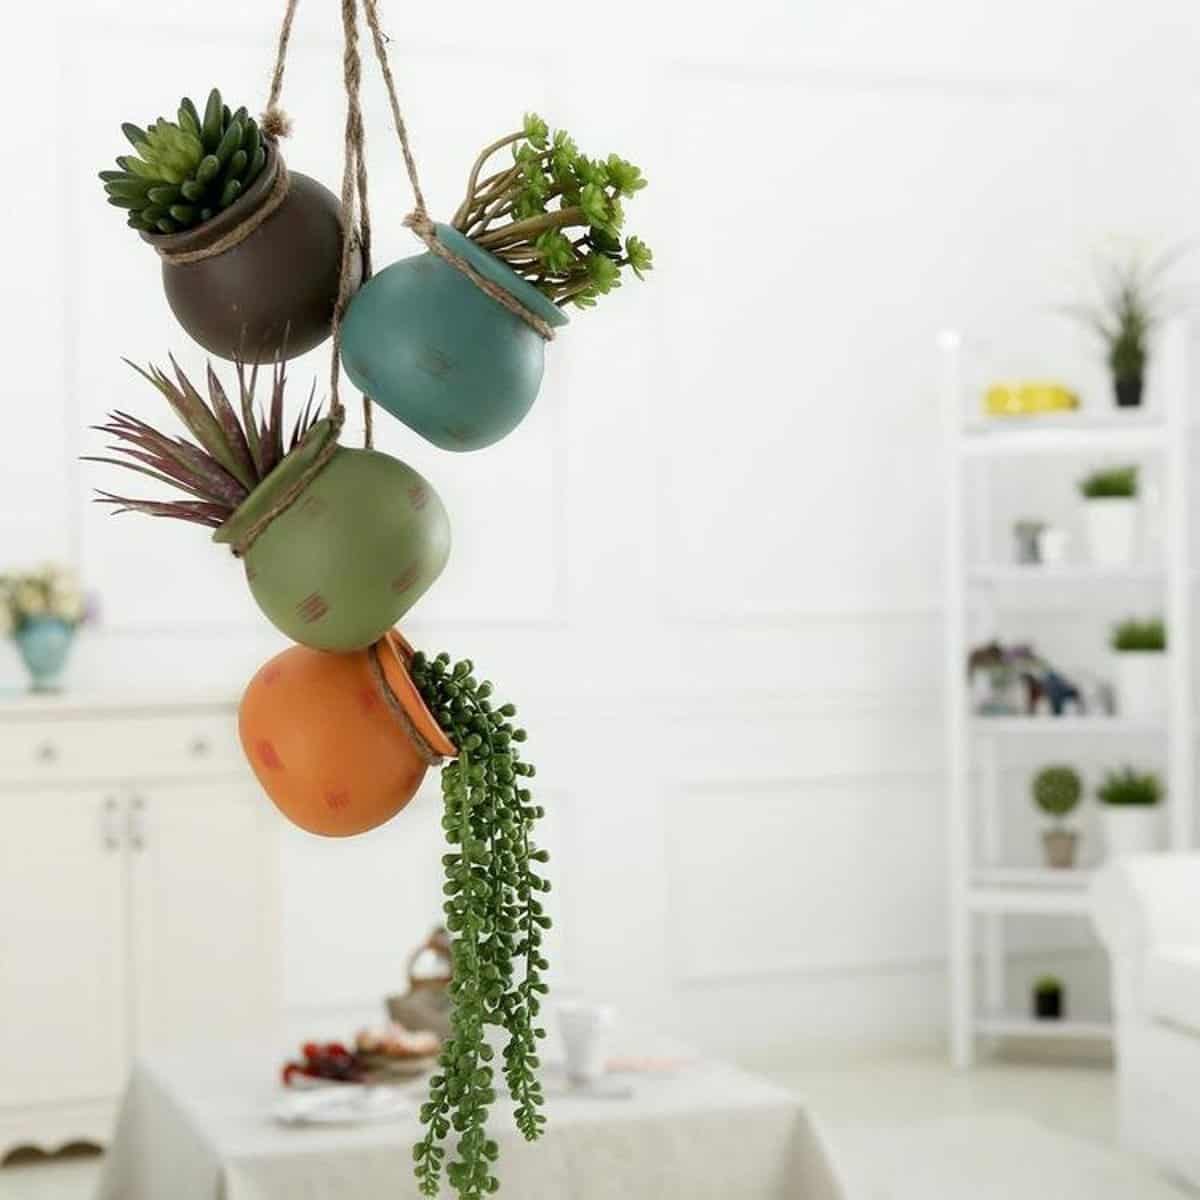 15 Best Hanging Indoor Planters for Your Home - Paisley Plants